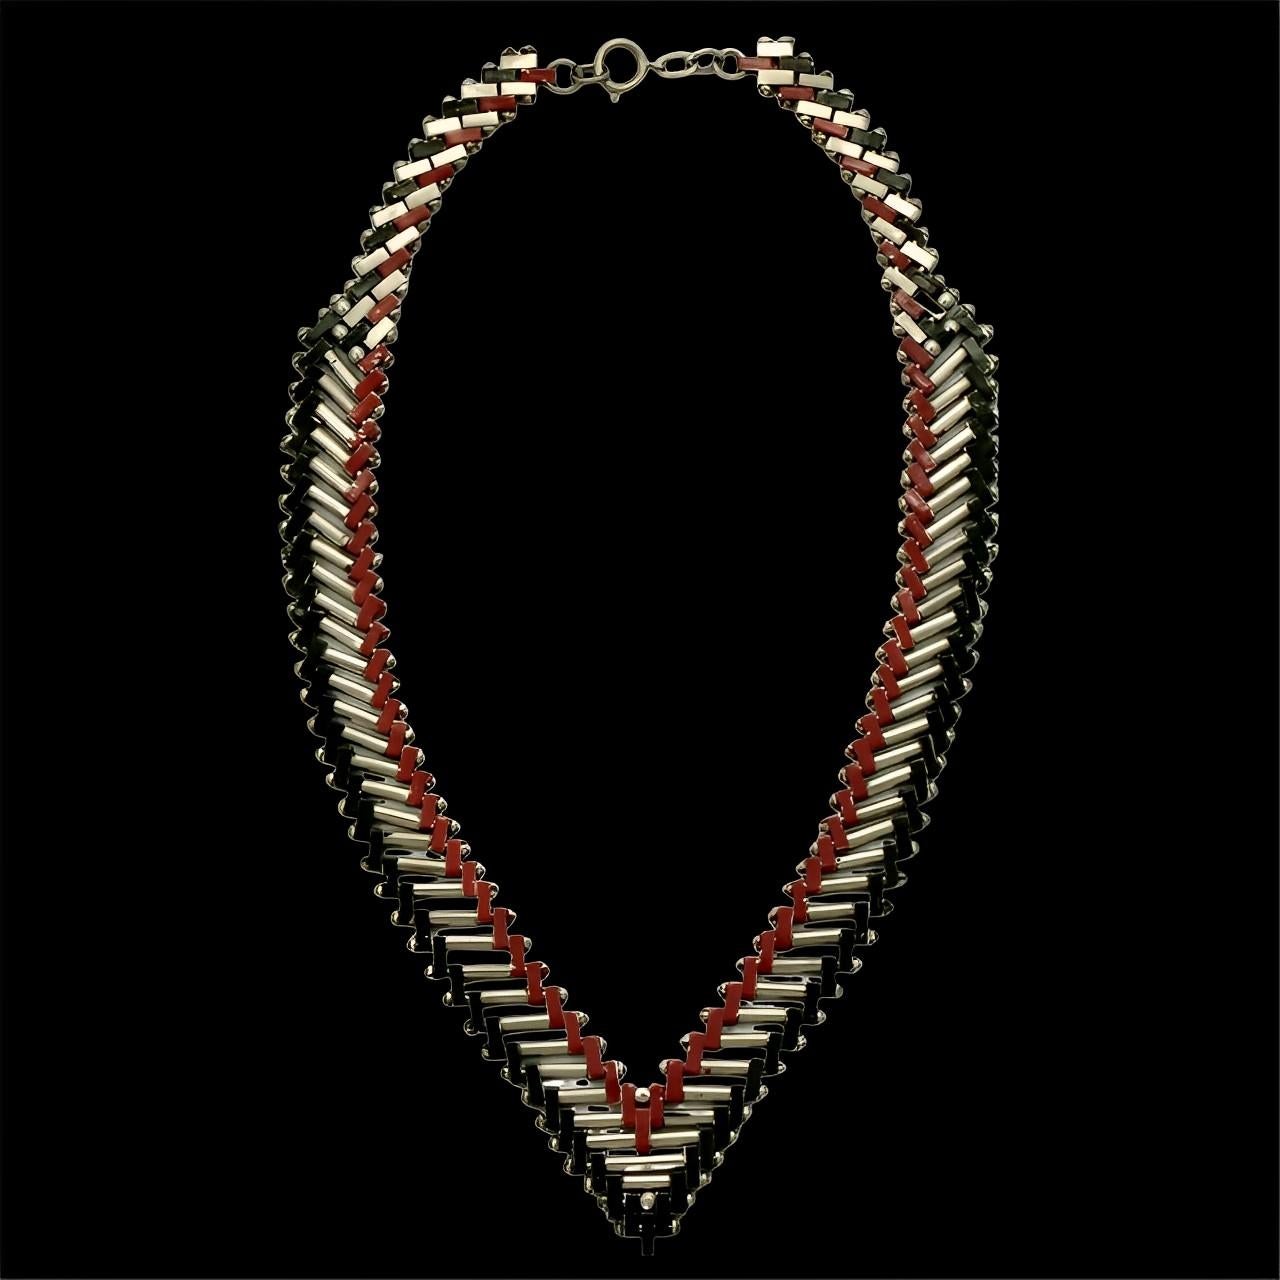 Jakob Bengel Art Deco Chrome Red and Black Enamel Necklace circa 1930s For Sale 4